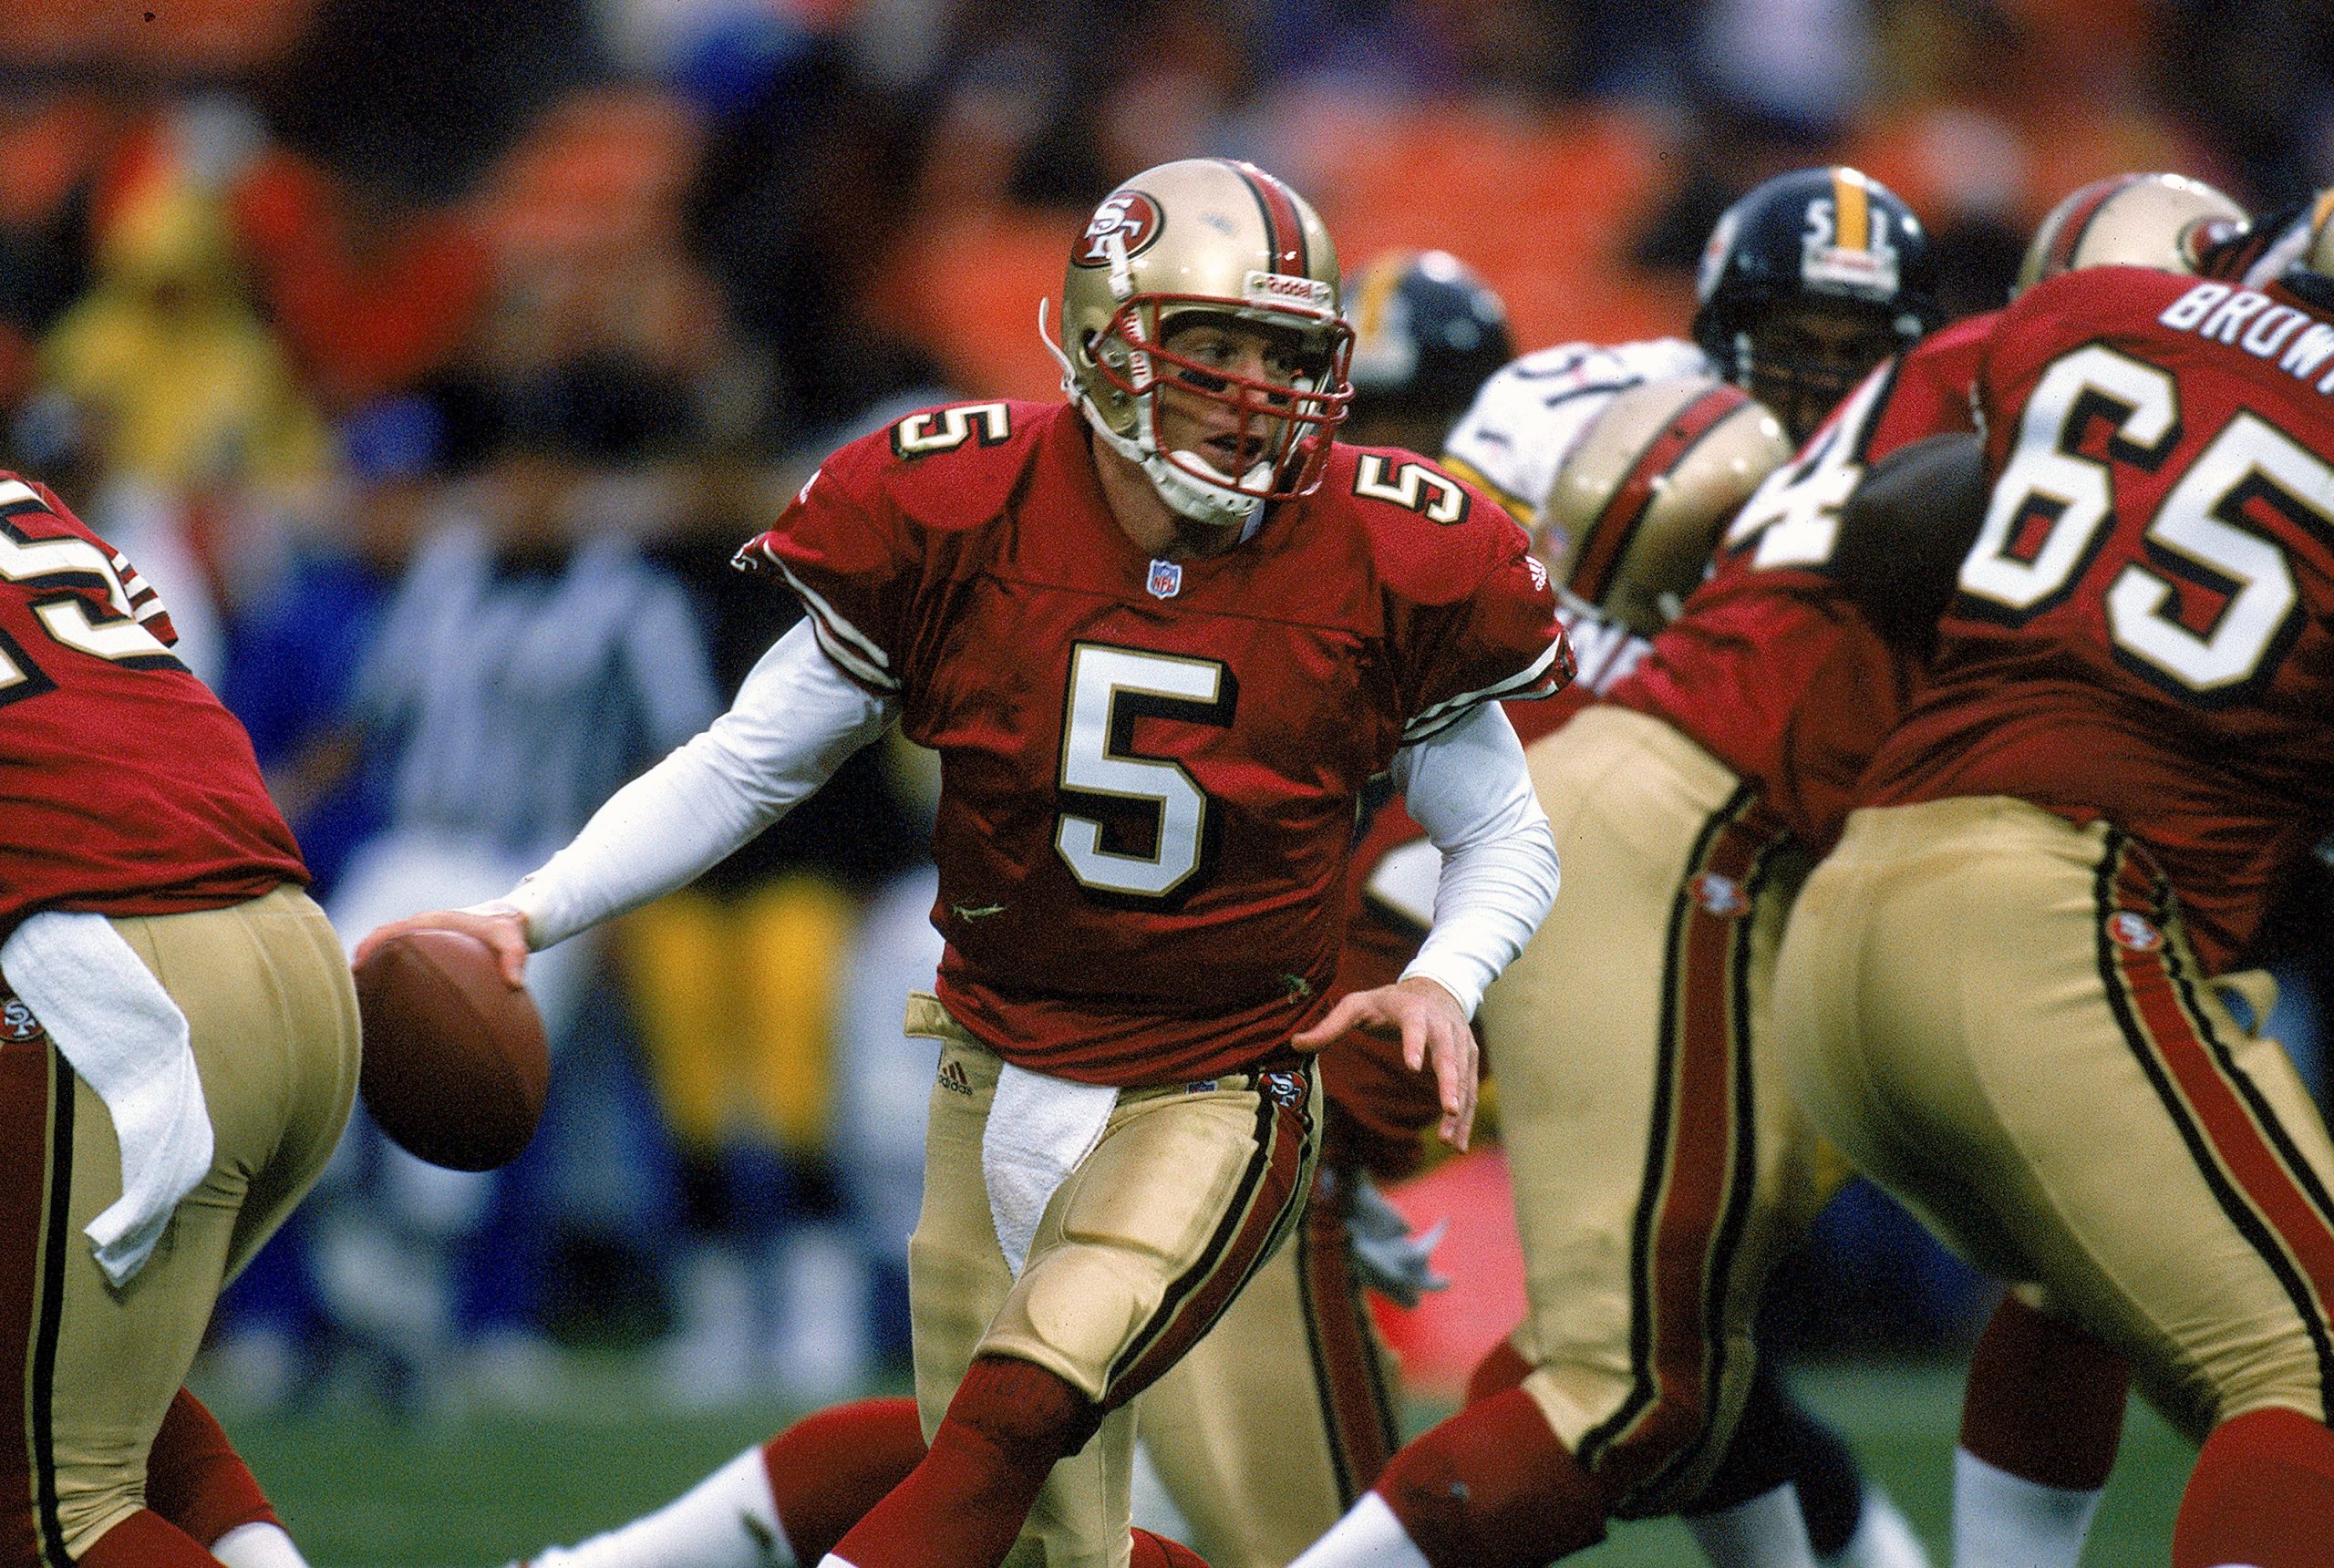 7 Nov 1999: Jeff Garcia #5 of the San Francisco 49ers grips the ball during the game against the Pi...